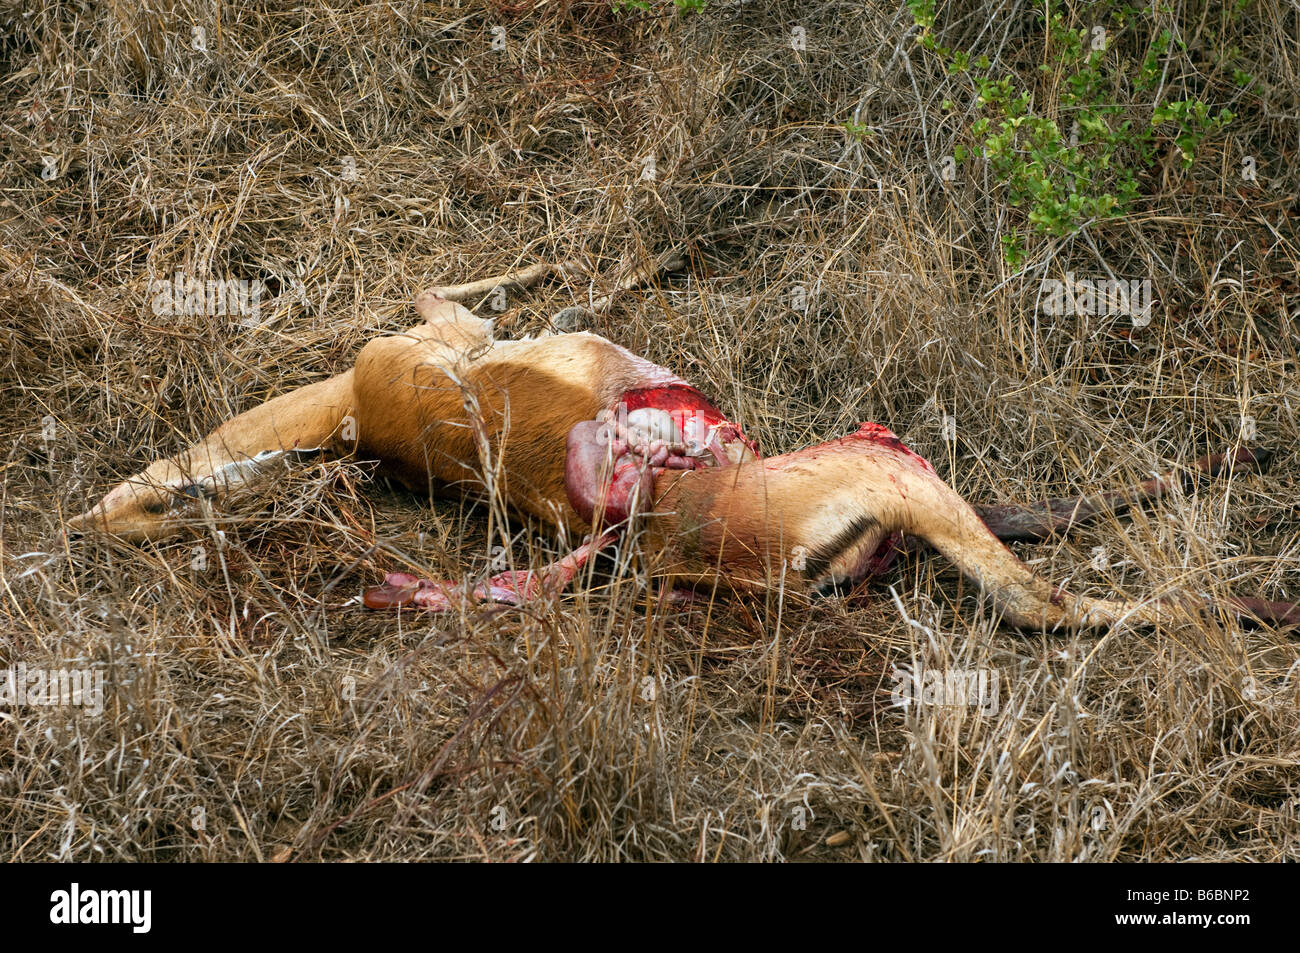 killed dead impala take prey of a wild cat big-cat lion gepard cheetah leopard the killer was disturbed by the observers Stock Photo